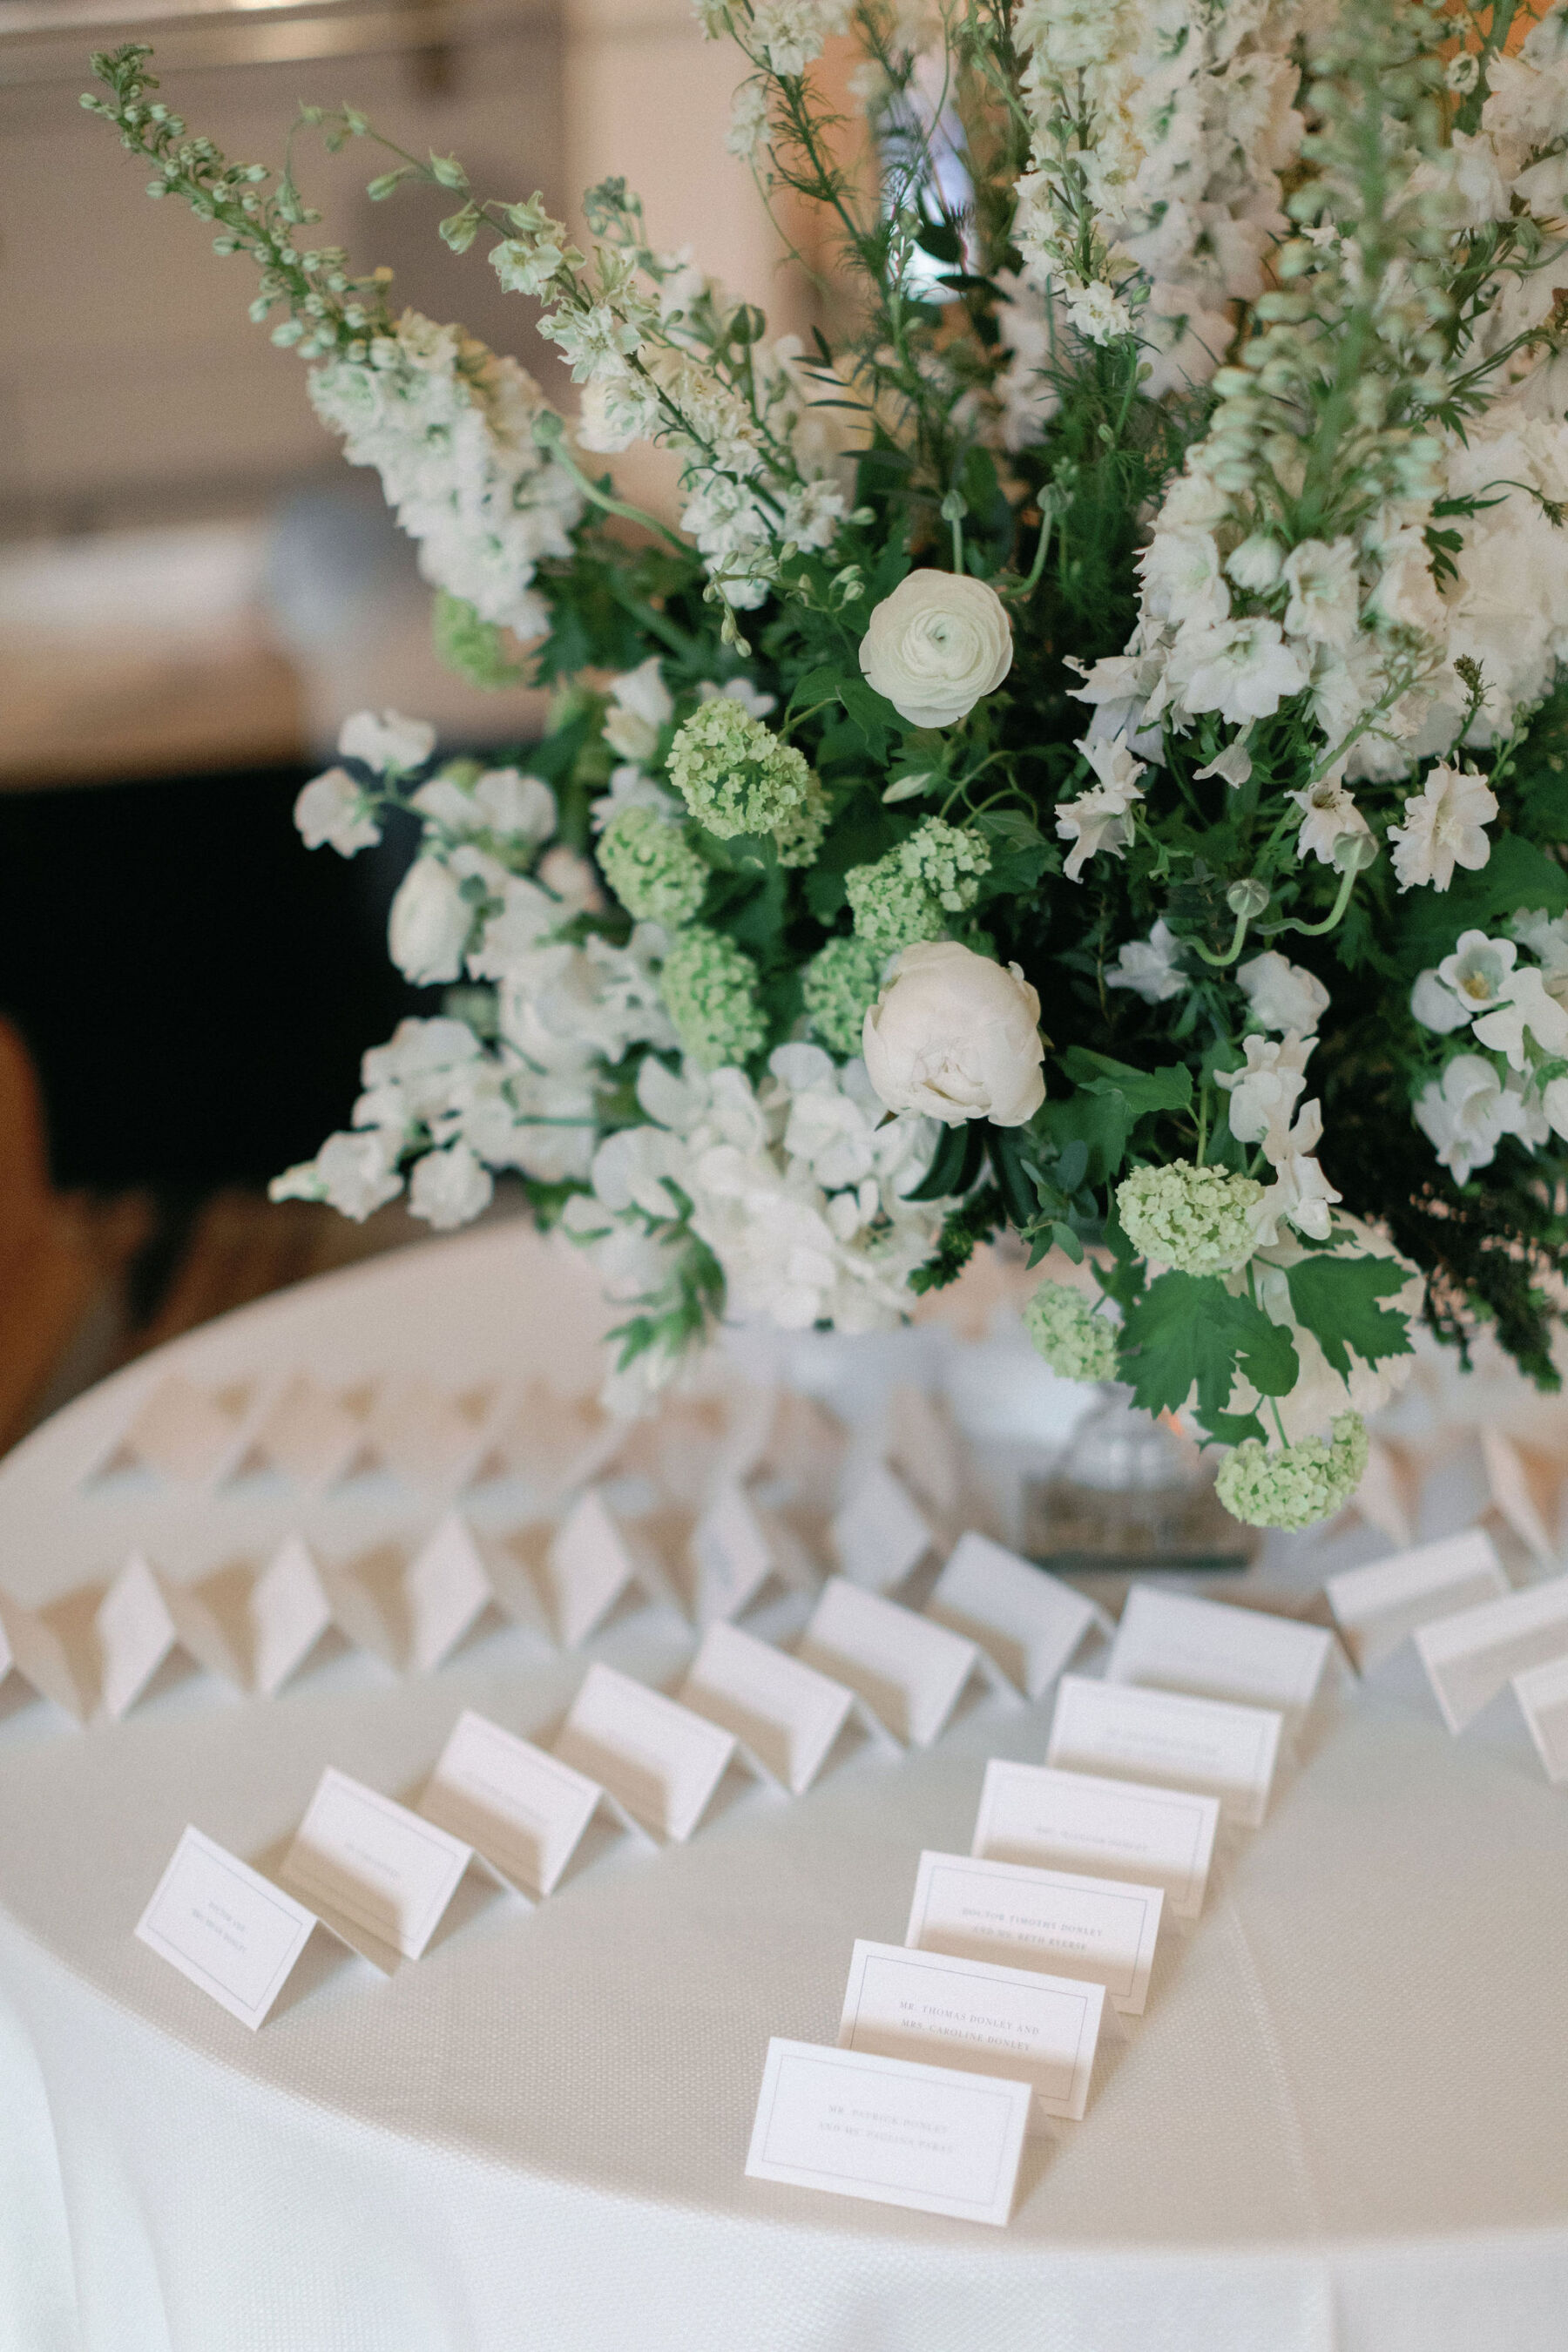 Bespoke escort cards digitally printed on white place cards.